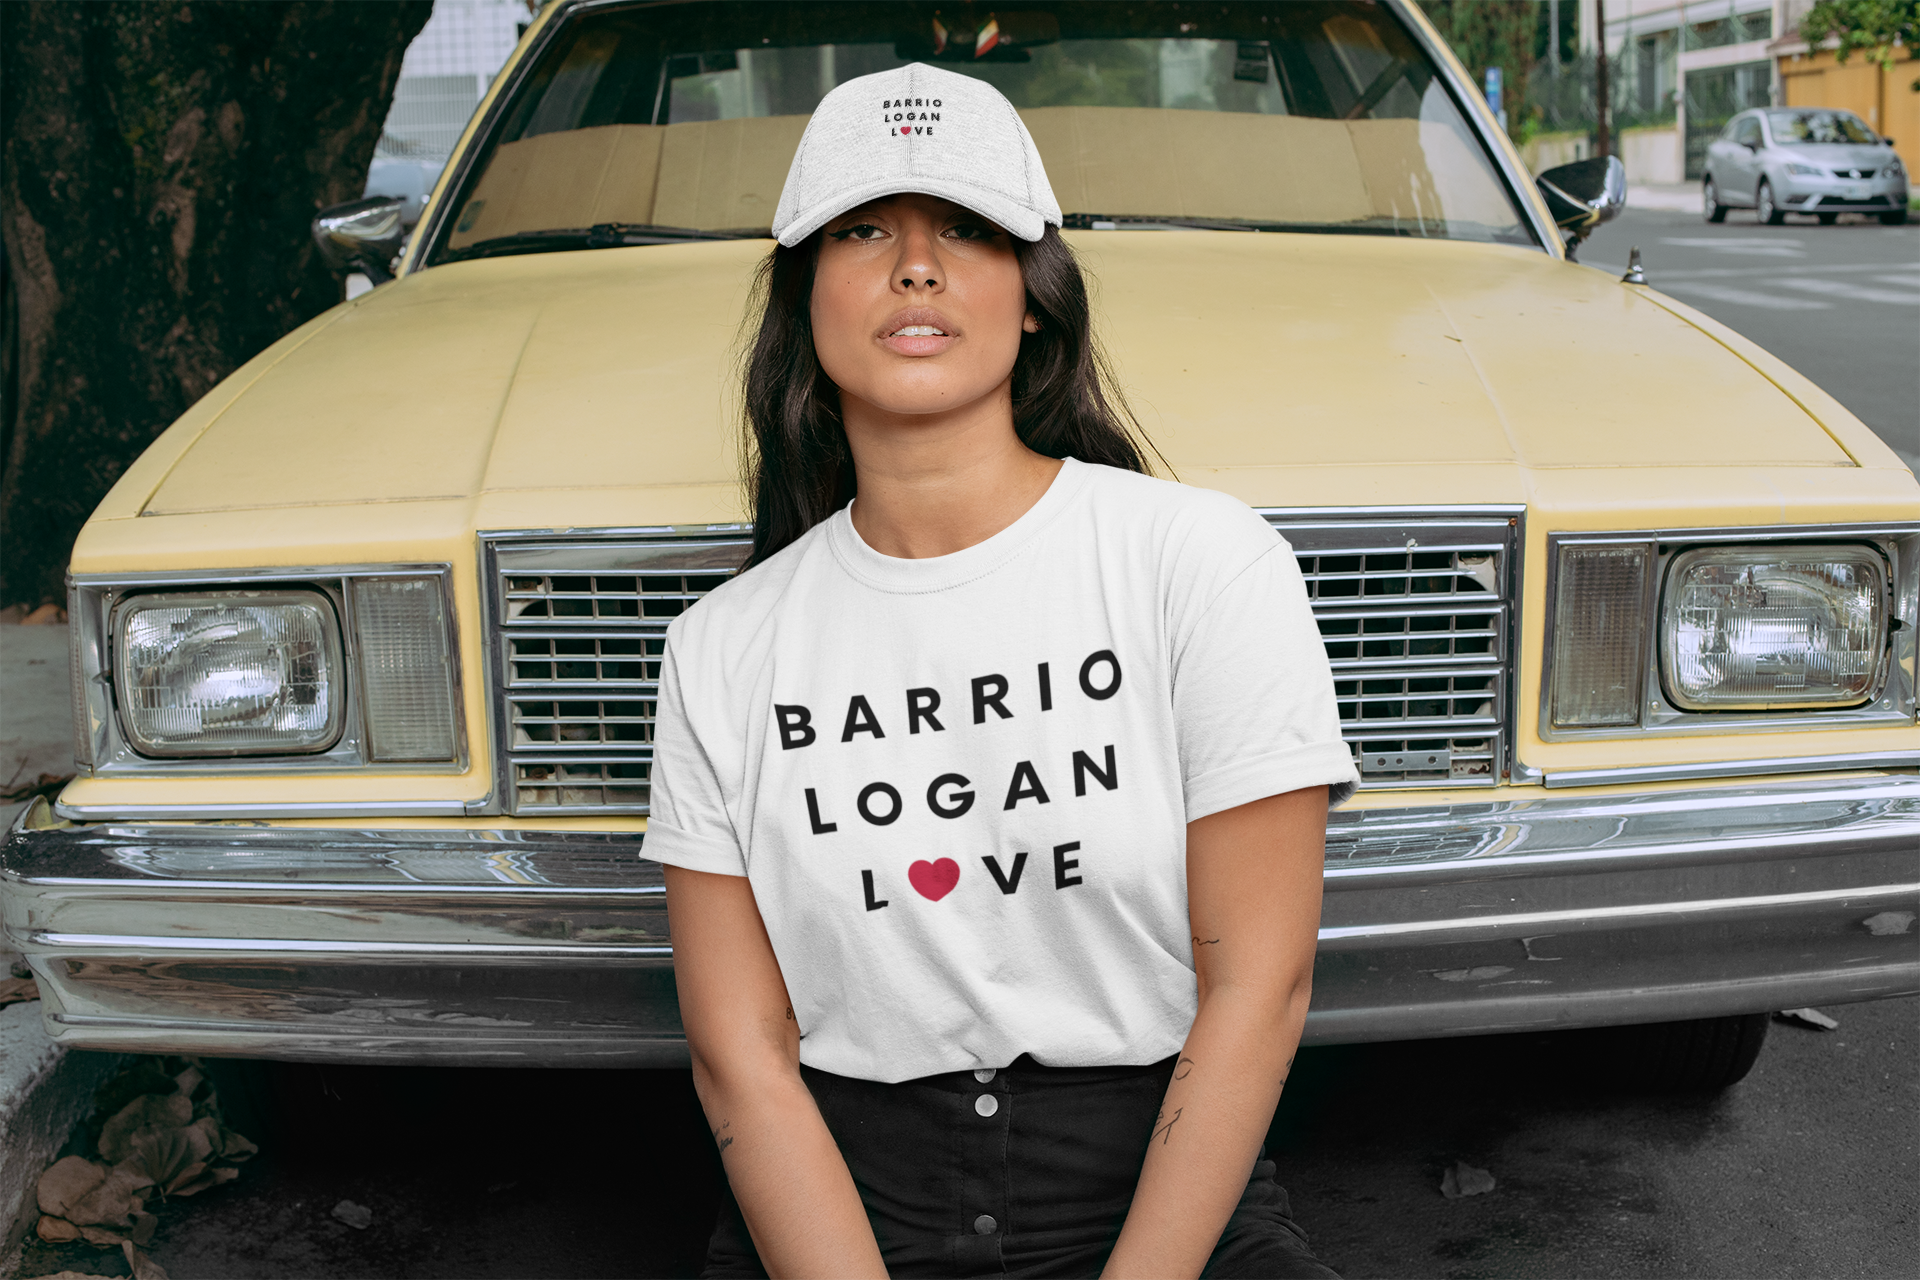 Pretty Latina posing in front of a lowrider wearing matching Barrio Logan t-shirt and hat.